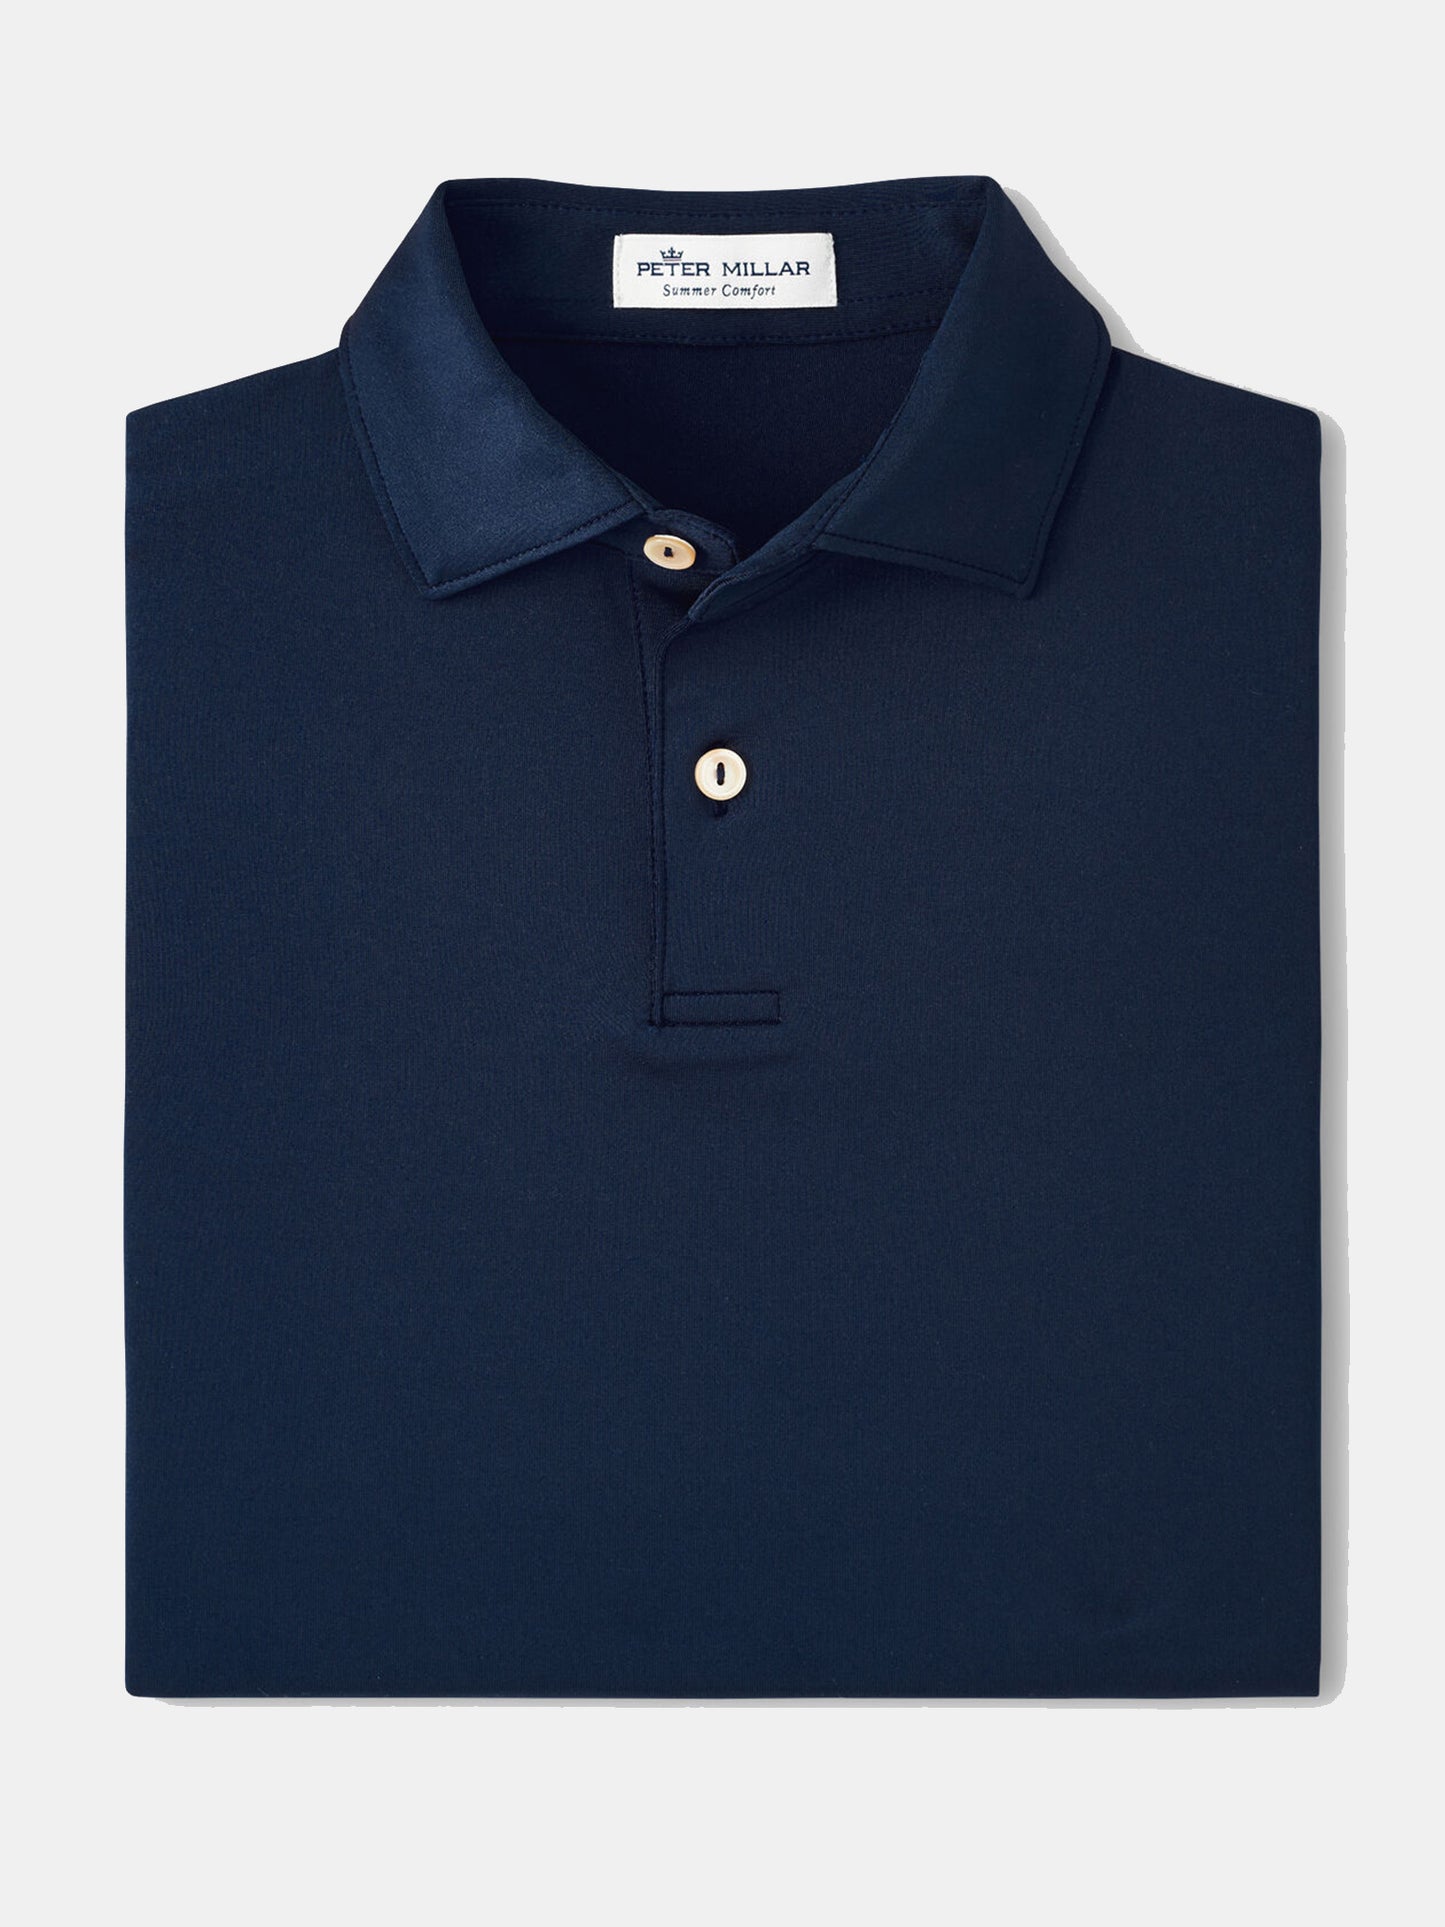 Peter Millar Collection Solid Youth Performance Polo